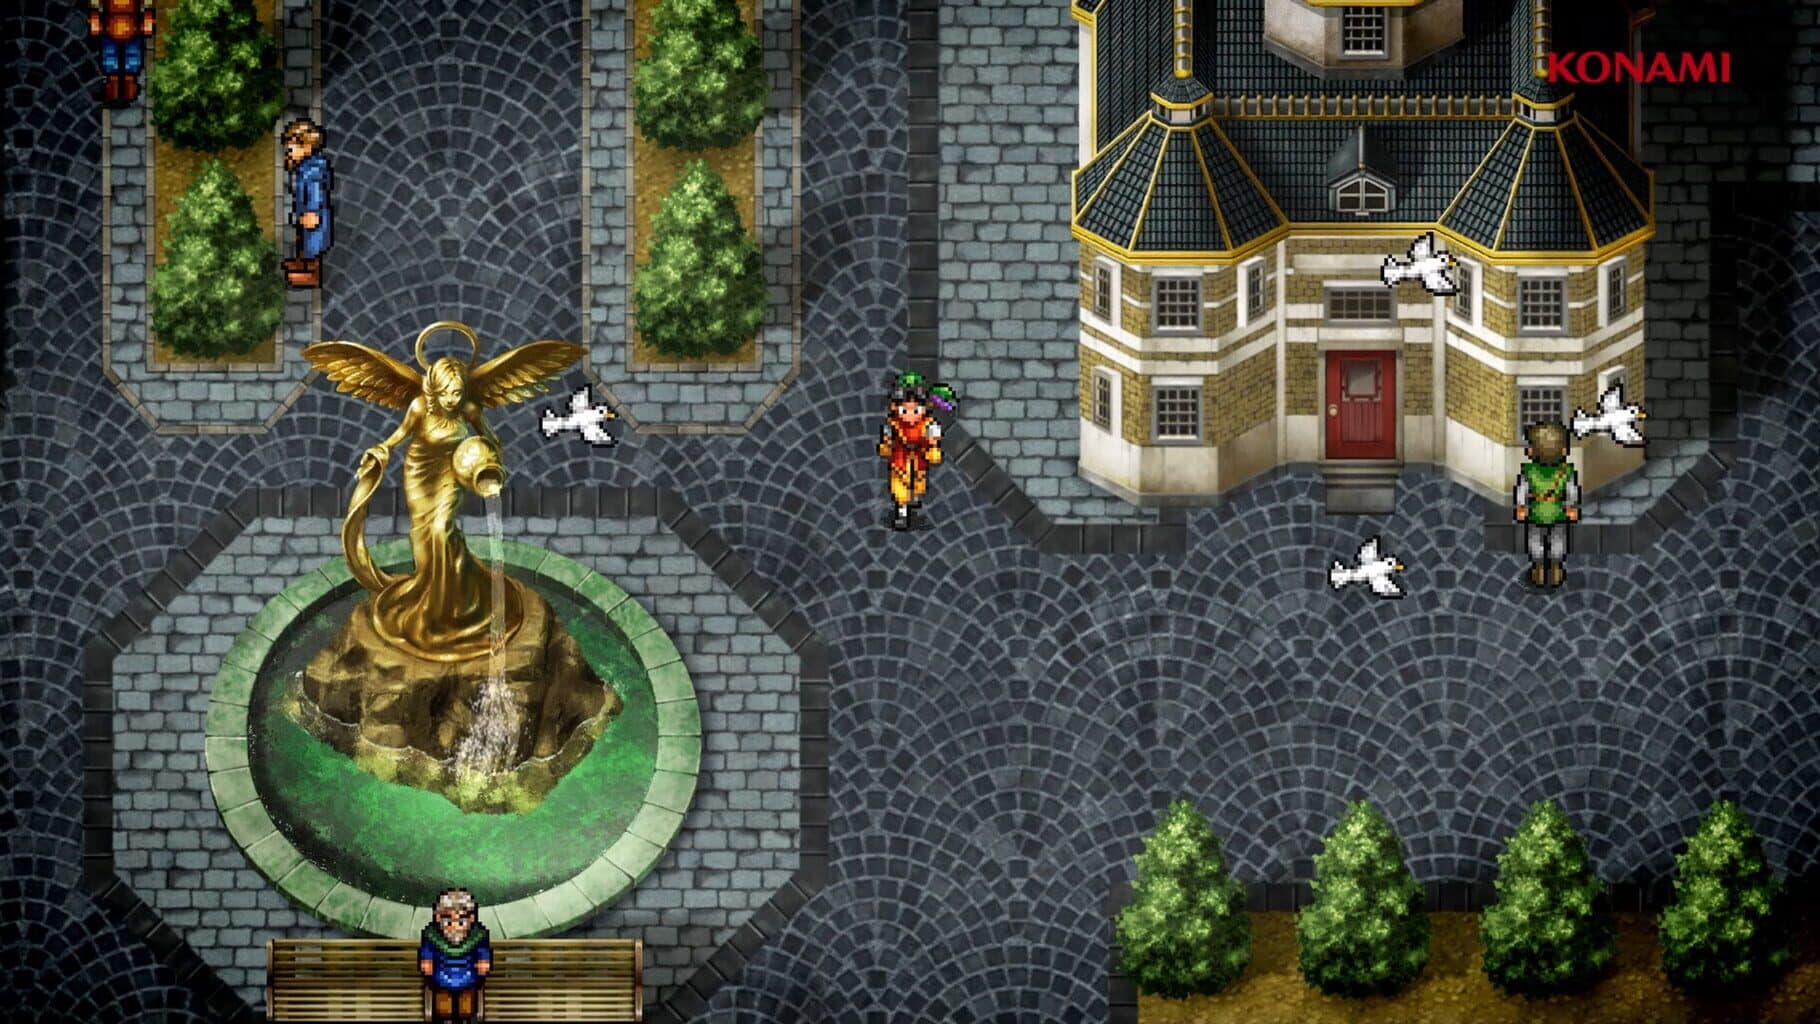 Suikoden I & II HD Remaster: Gate Rune and Dunan Unification Wars Image